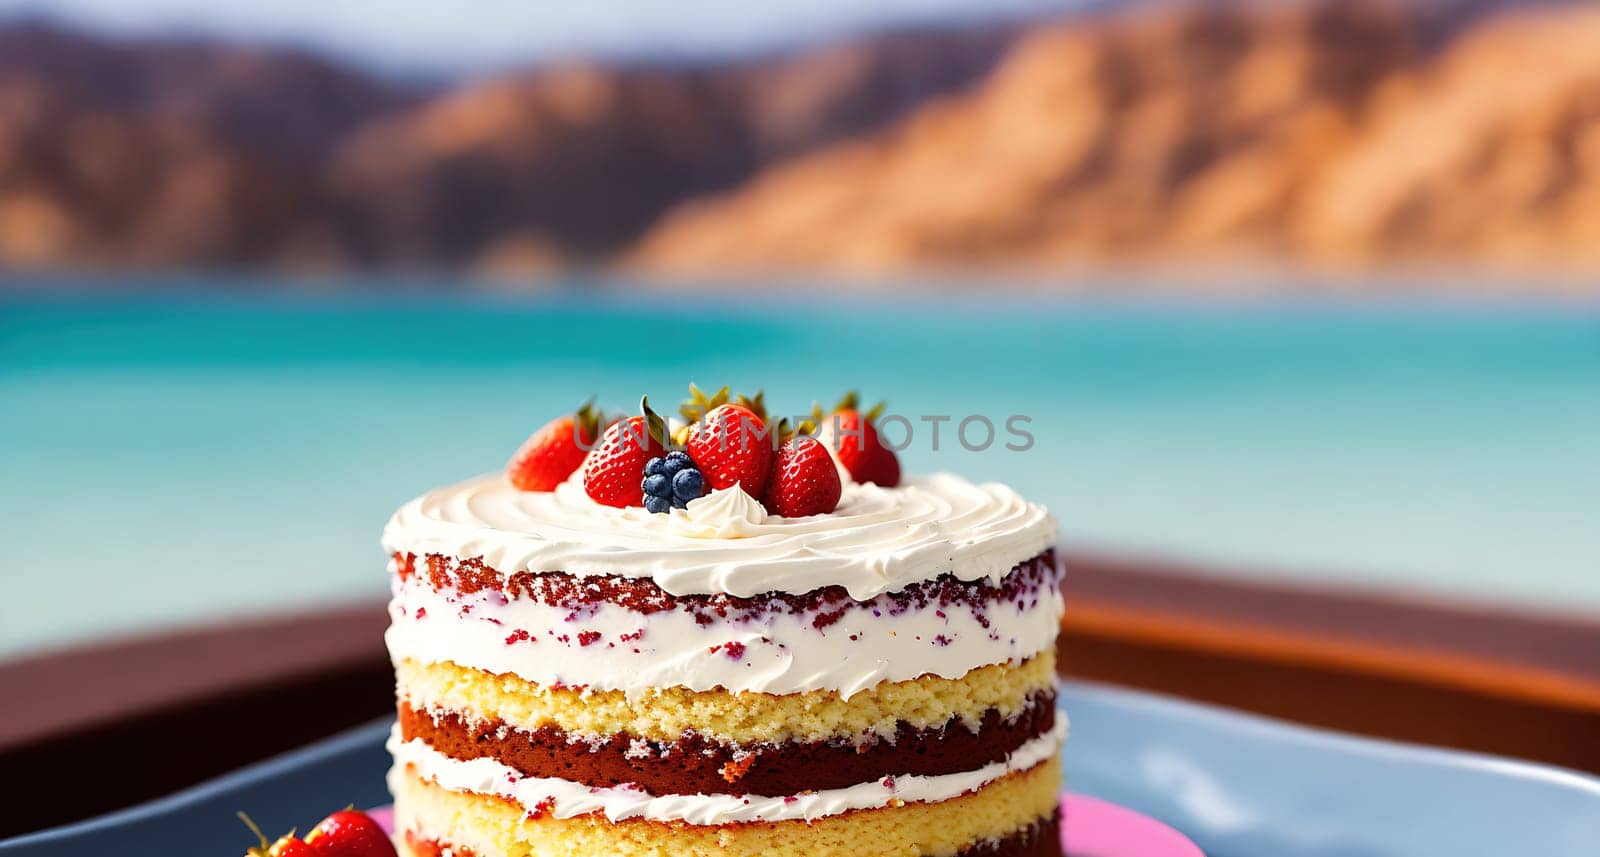 The image shows a cake with strawberries and whipped cream on top, sitting on a plate with a view of the ocean in the background.